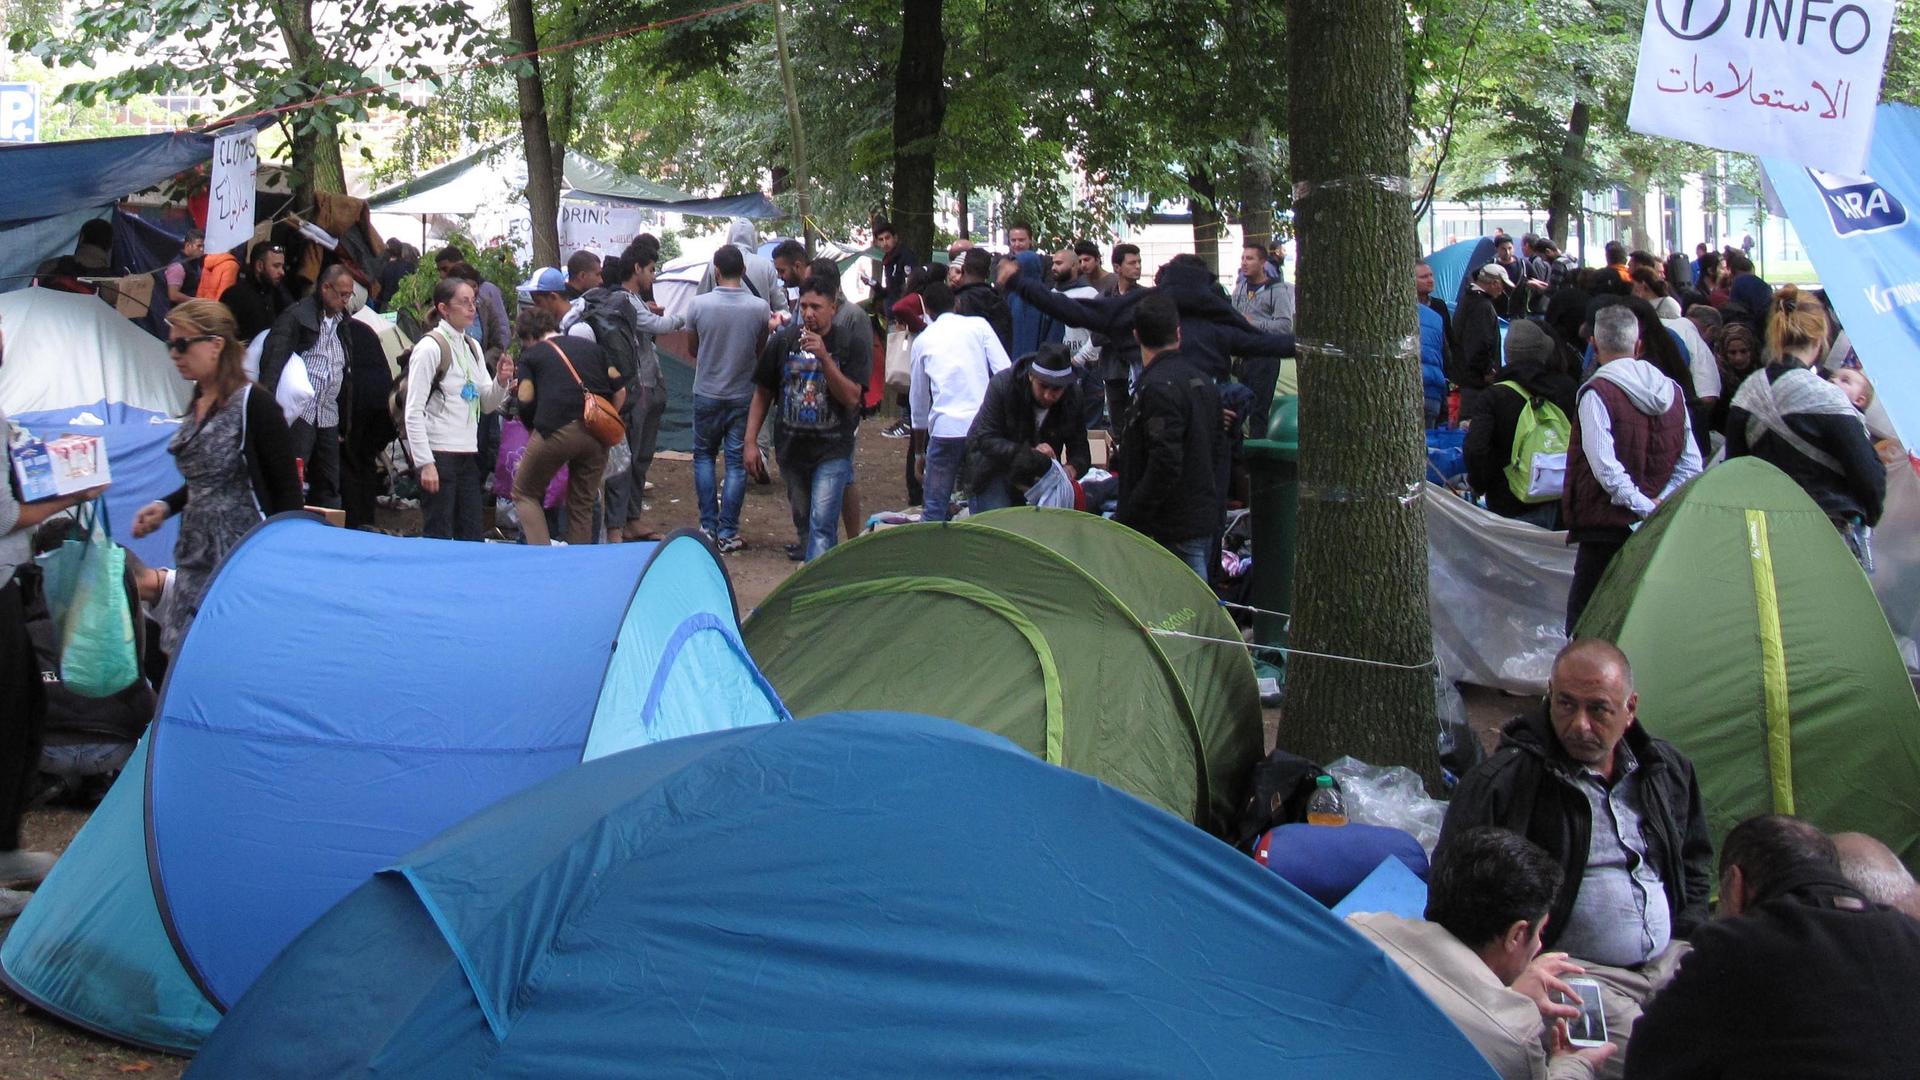 A public park in downtown Brussels houses a tent city with scores of families camping out in donated tents. Charity workers say they've never seen so many refugees occupy a public space at one time in Belgium. 